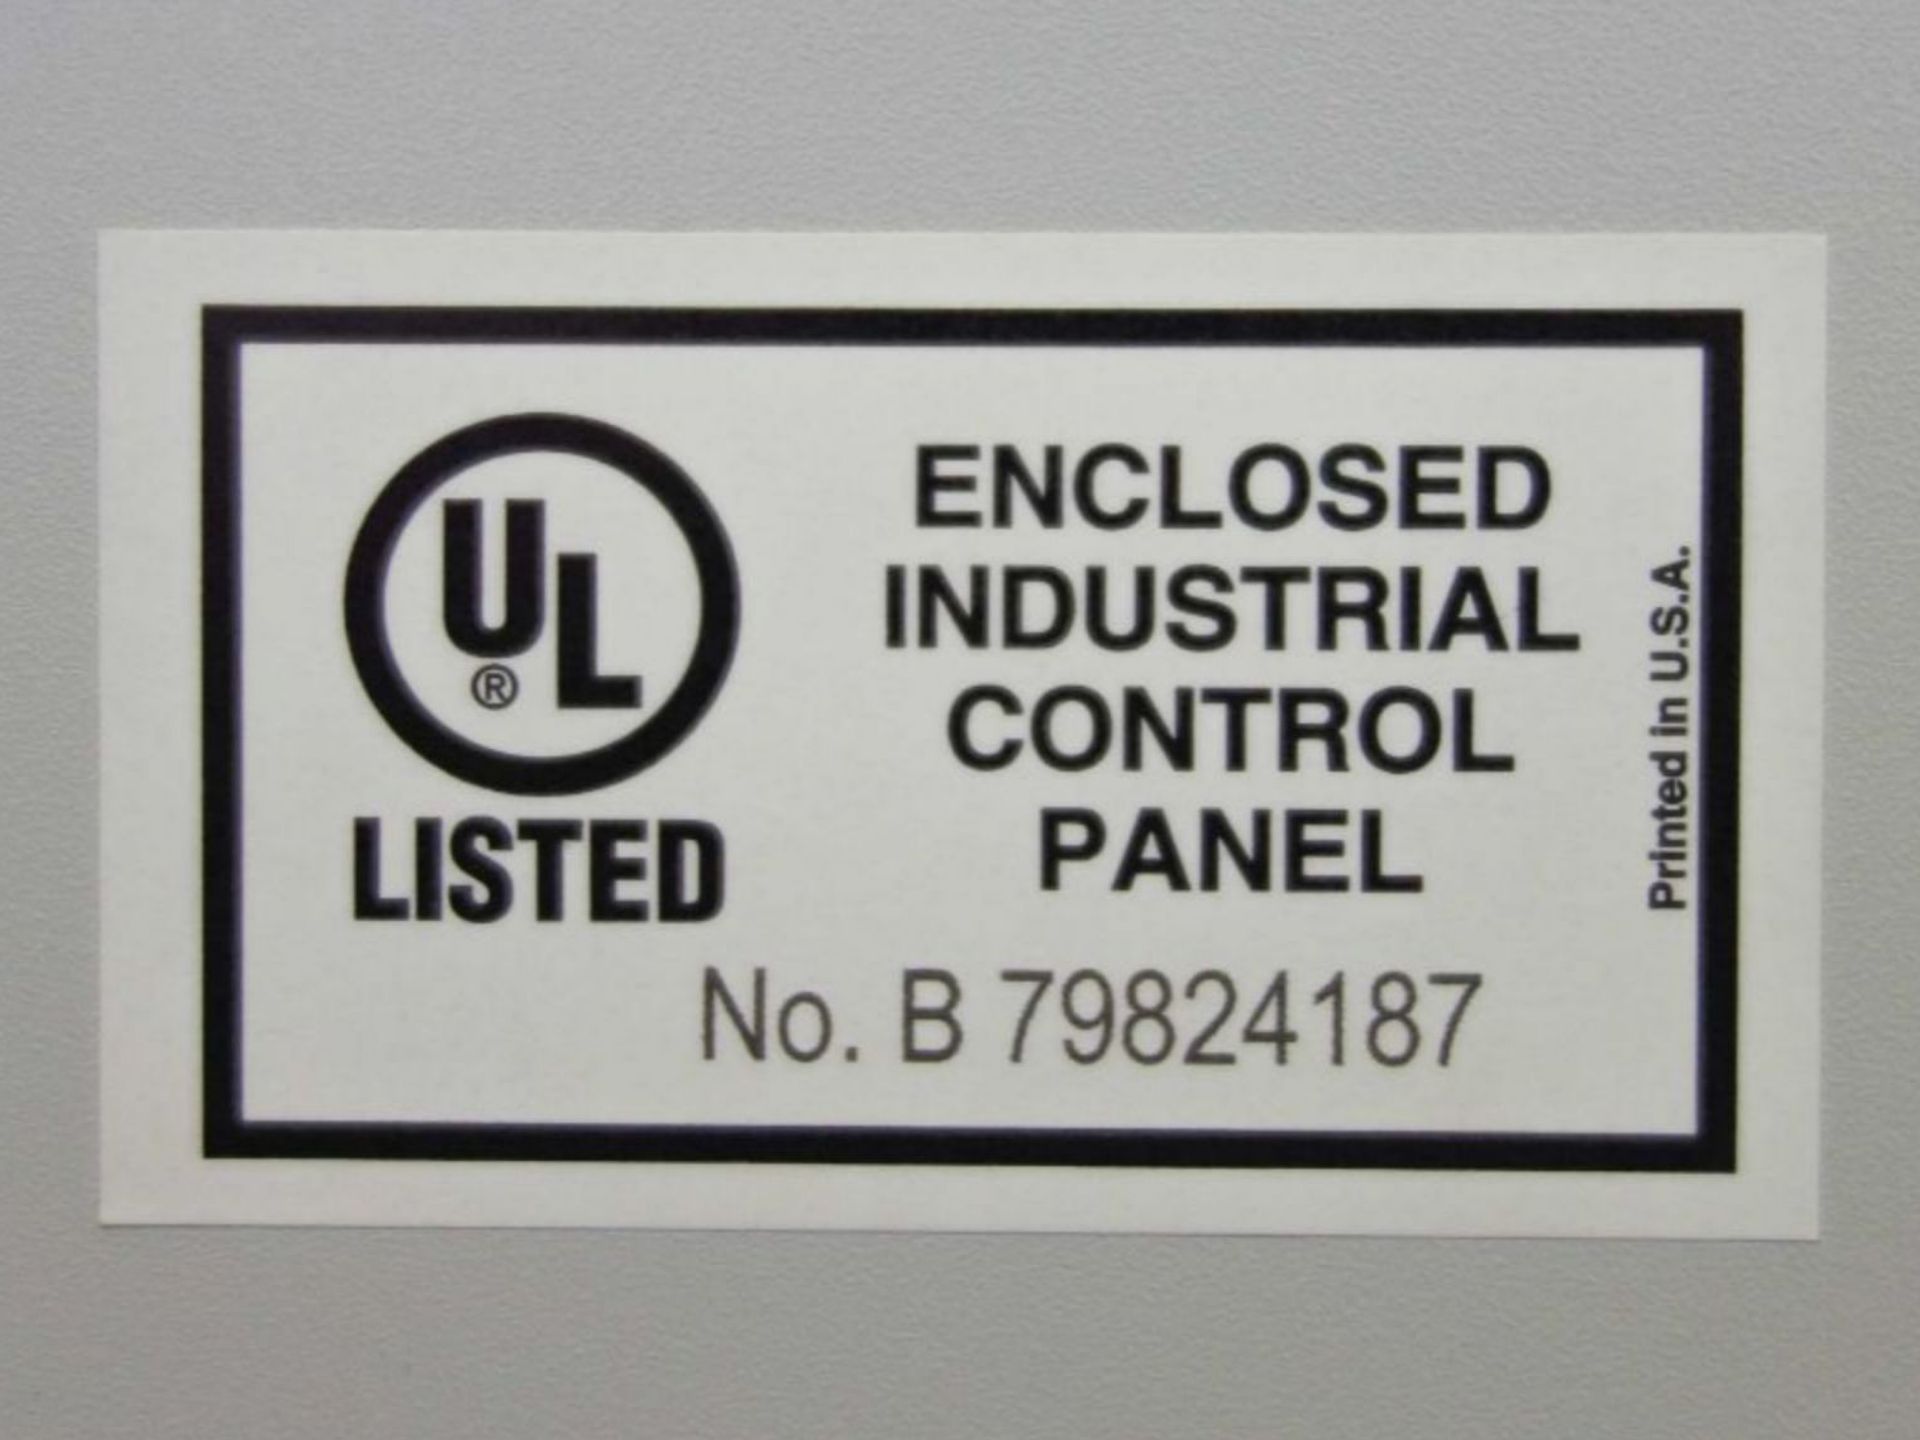 Axis Controls are UL 508a certified!